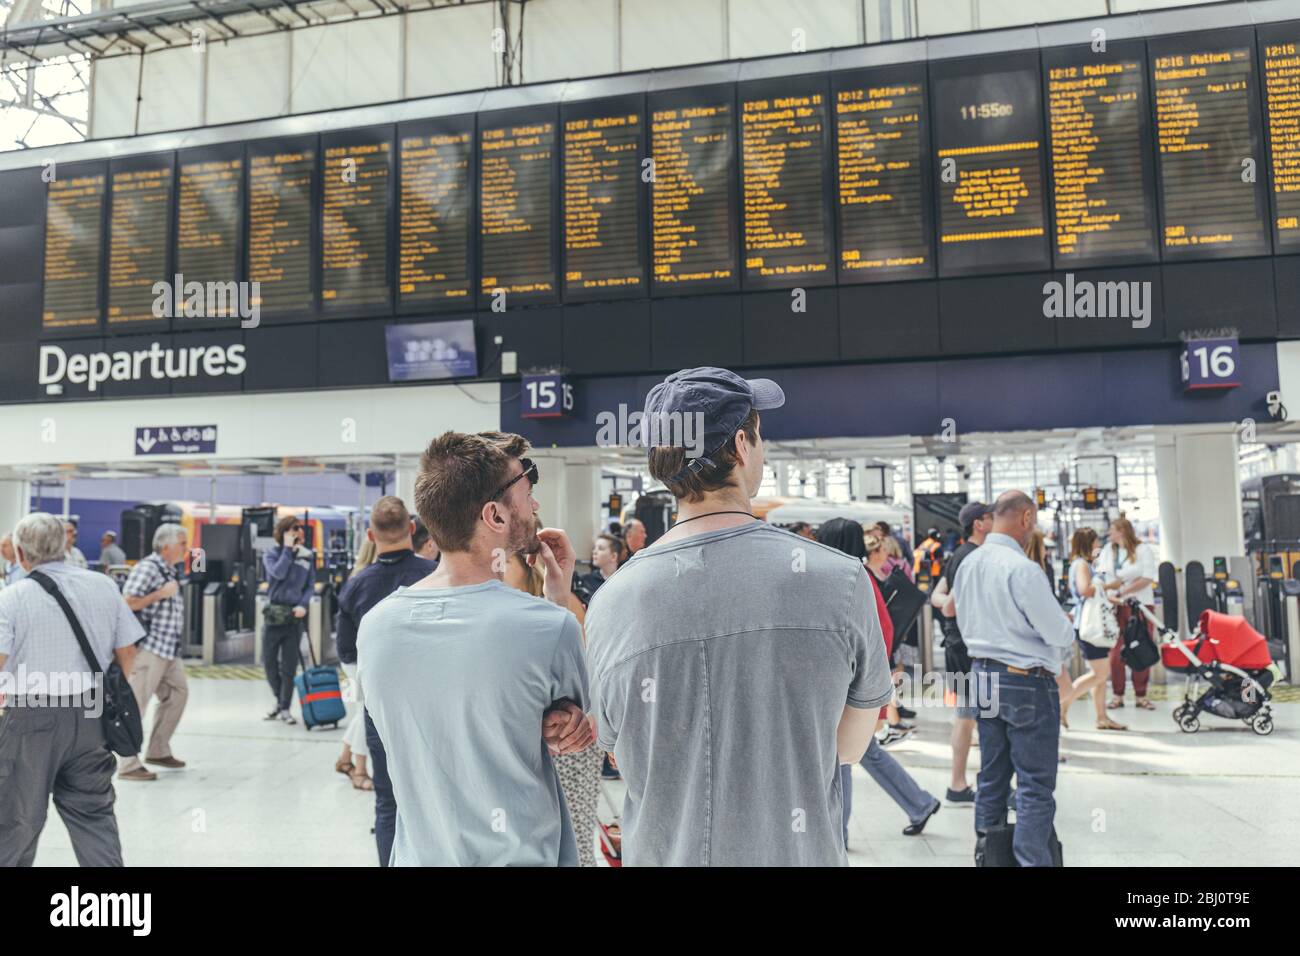 London/UK-1/8/19:young men waiting for their train at the London Waterloo station in a rush-hour. Central London terminus on the National Rail network Stock Photo